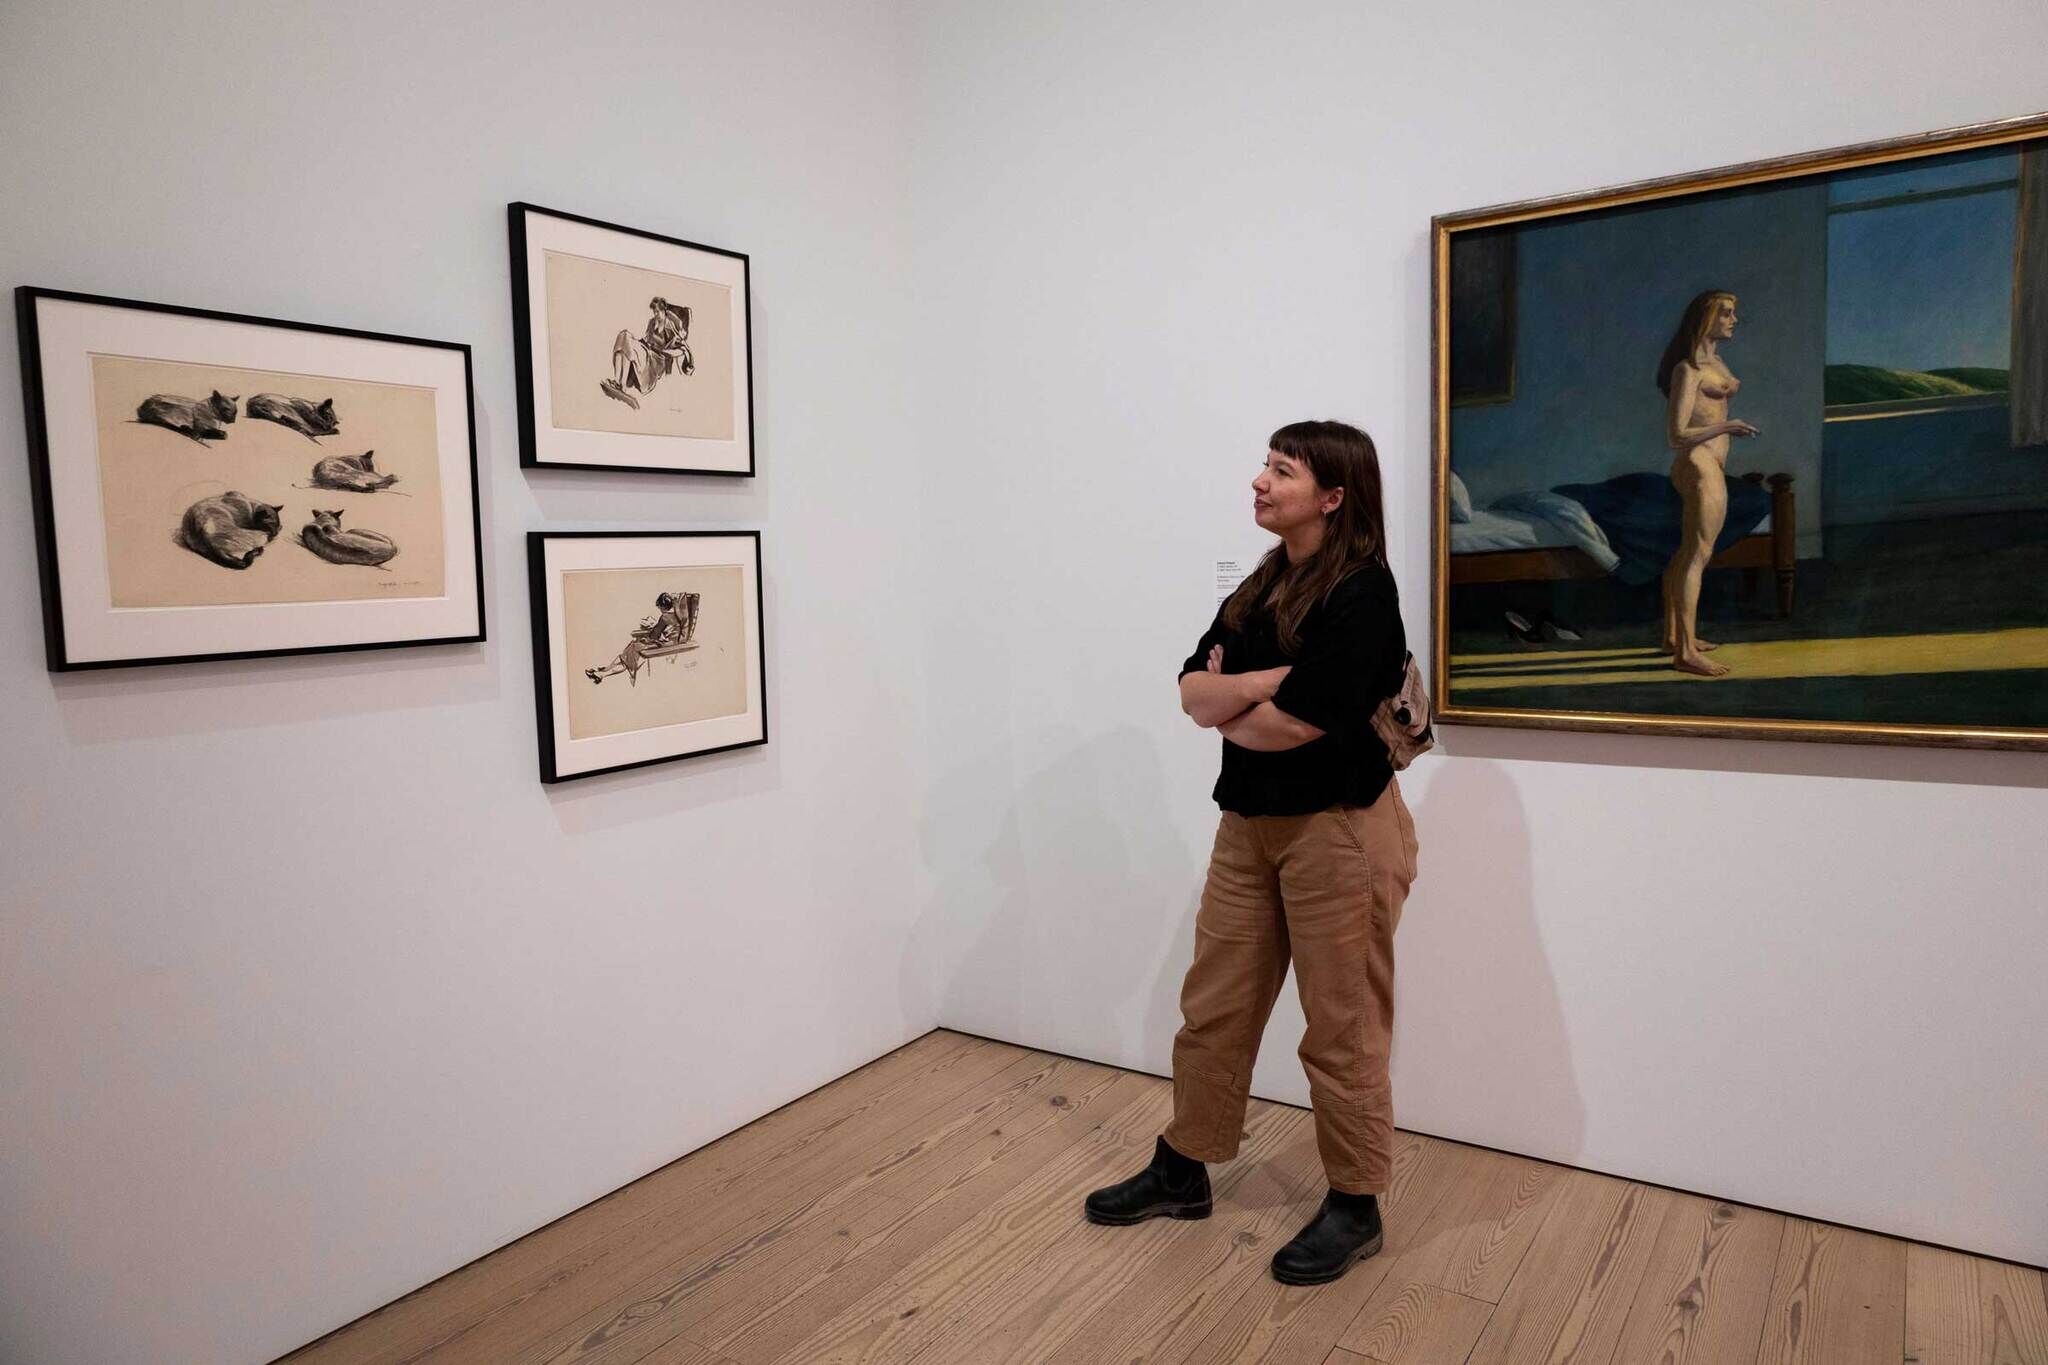 A woman stands in an art gallery, observing framed sketches of cats and people on the left wall and a painting of a nude woman by a window on the right.